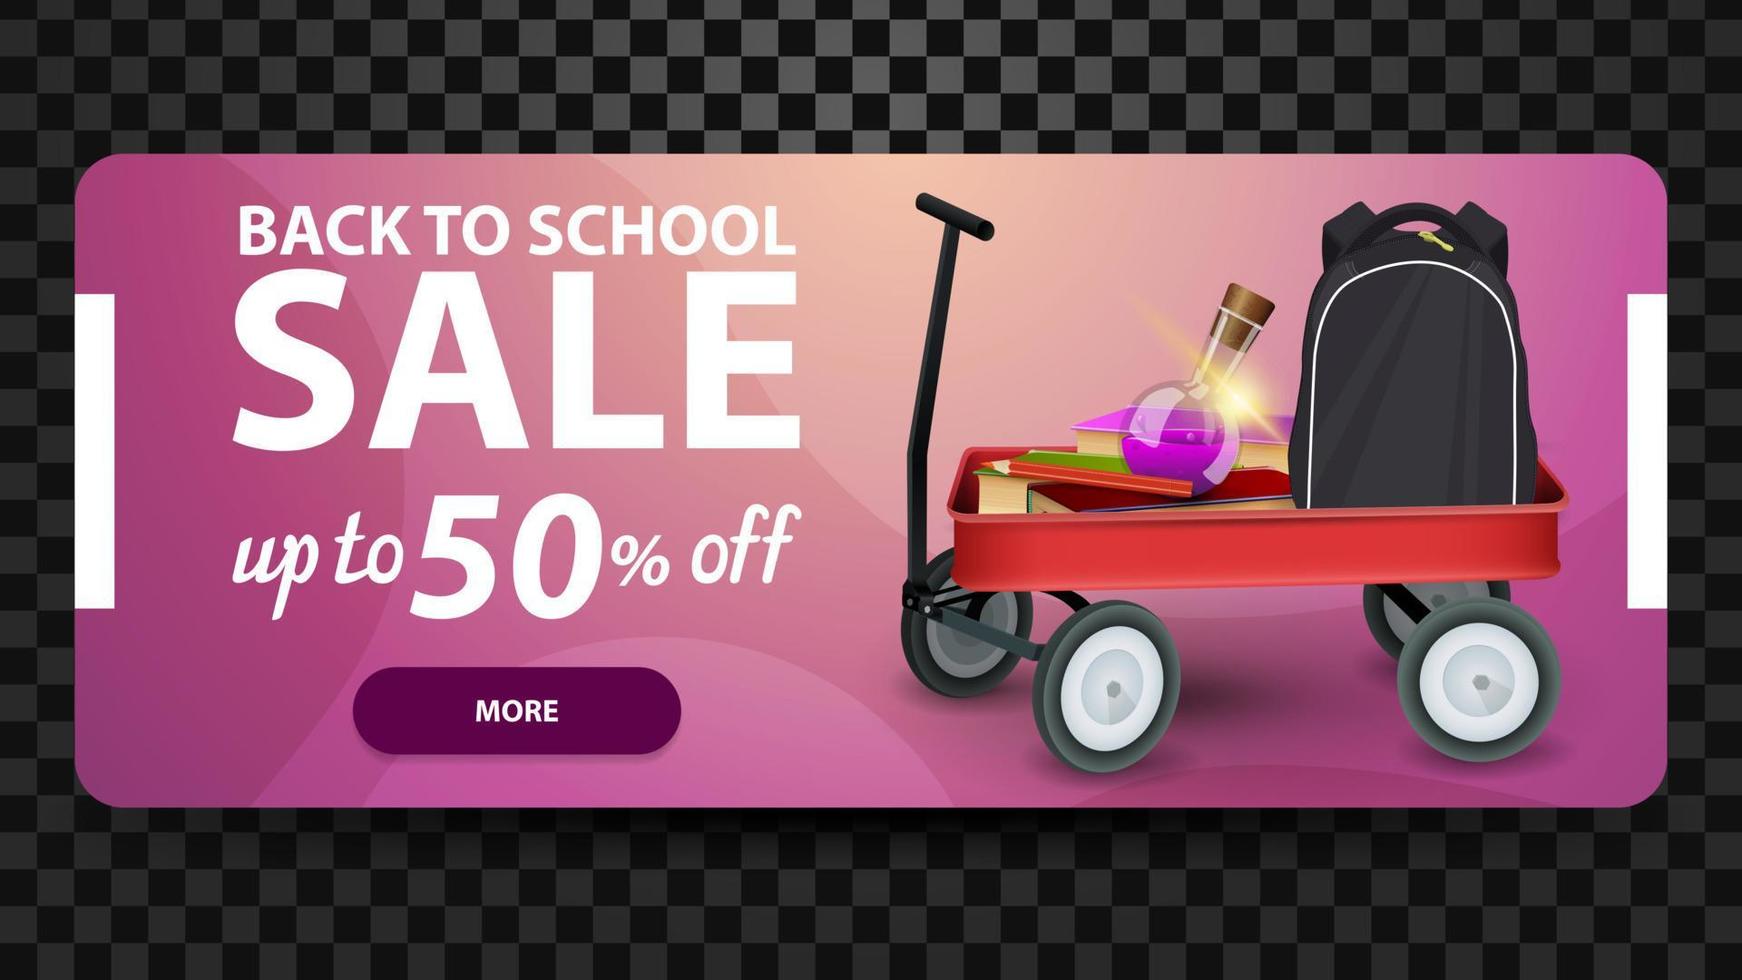 Back to school sale, pink banner template for your creativity with a cart full of school supplies vector